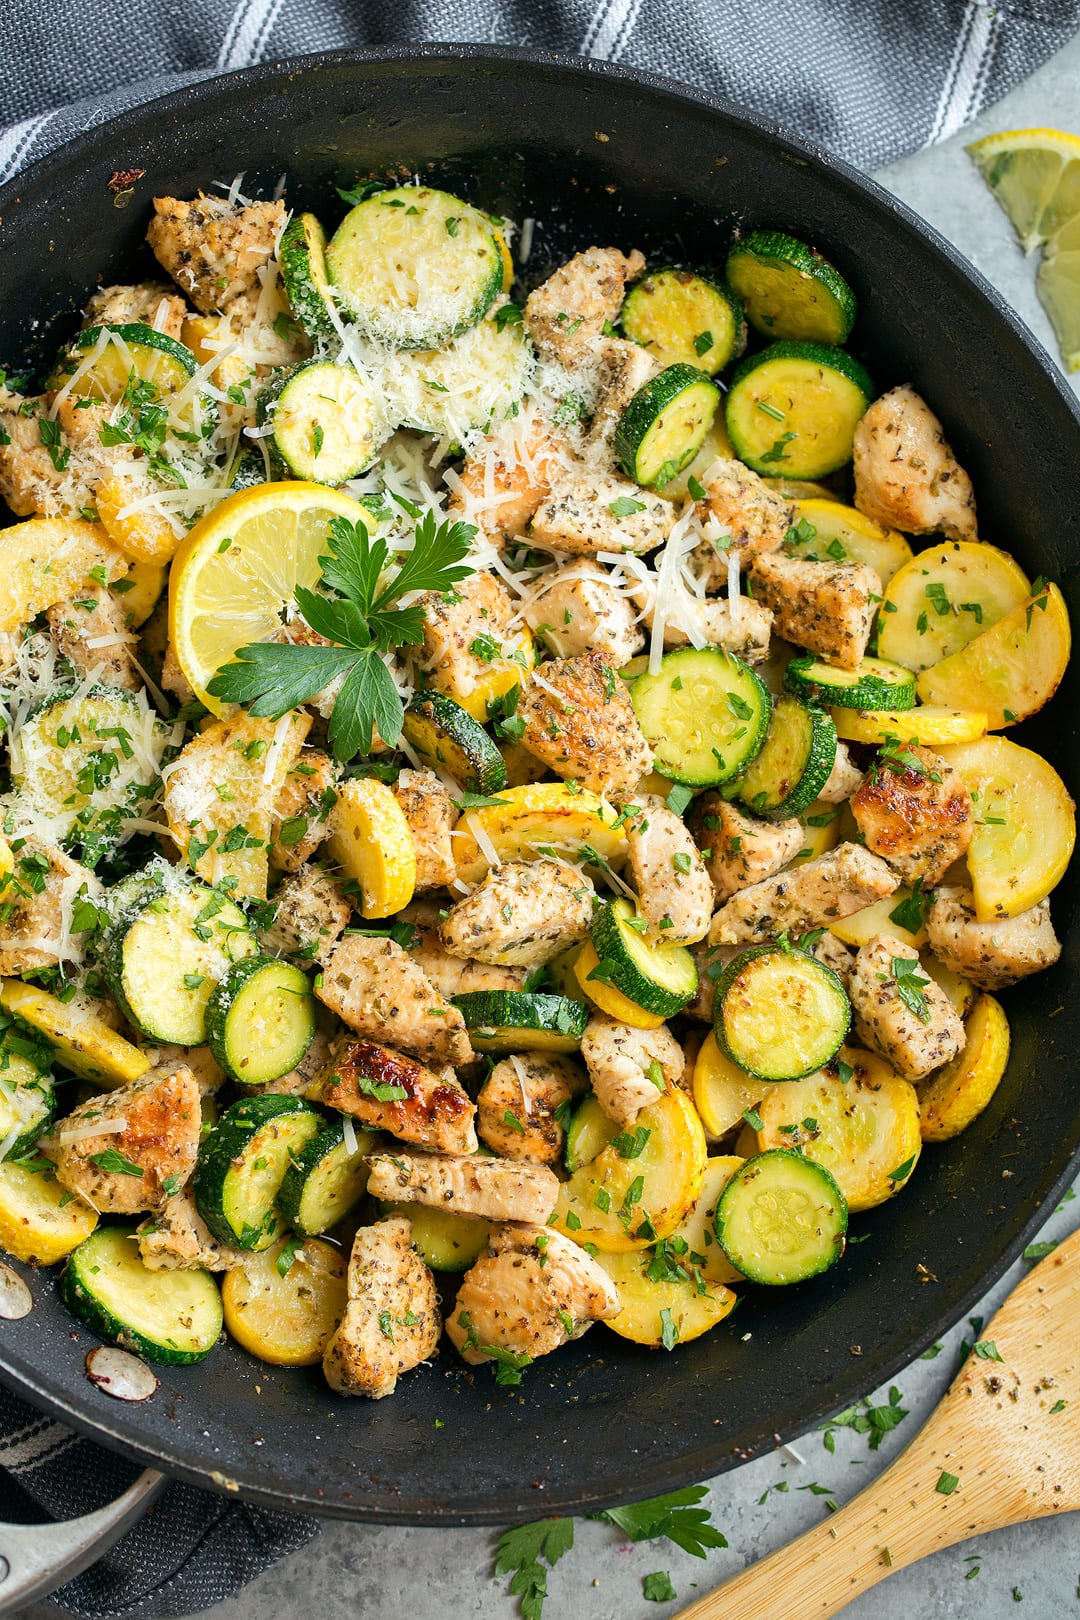 Skillet Lemon Parmesan Chicken with Zucchini and Squash garnished with Parmesan and parsley